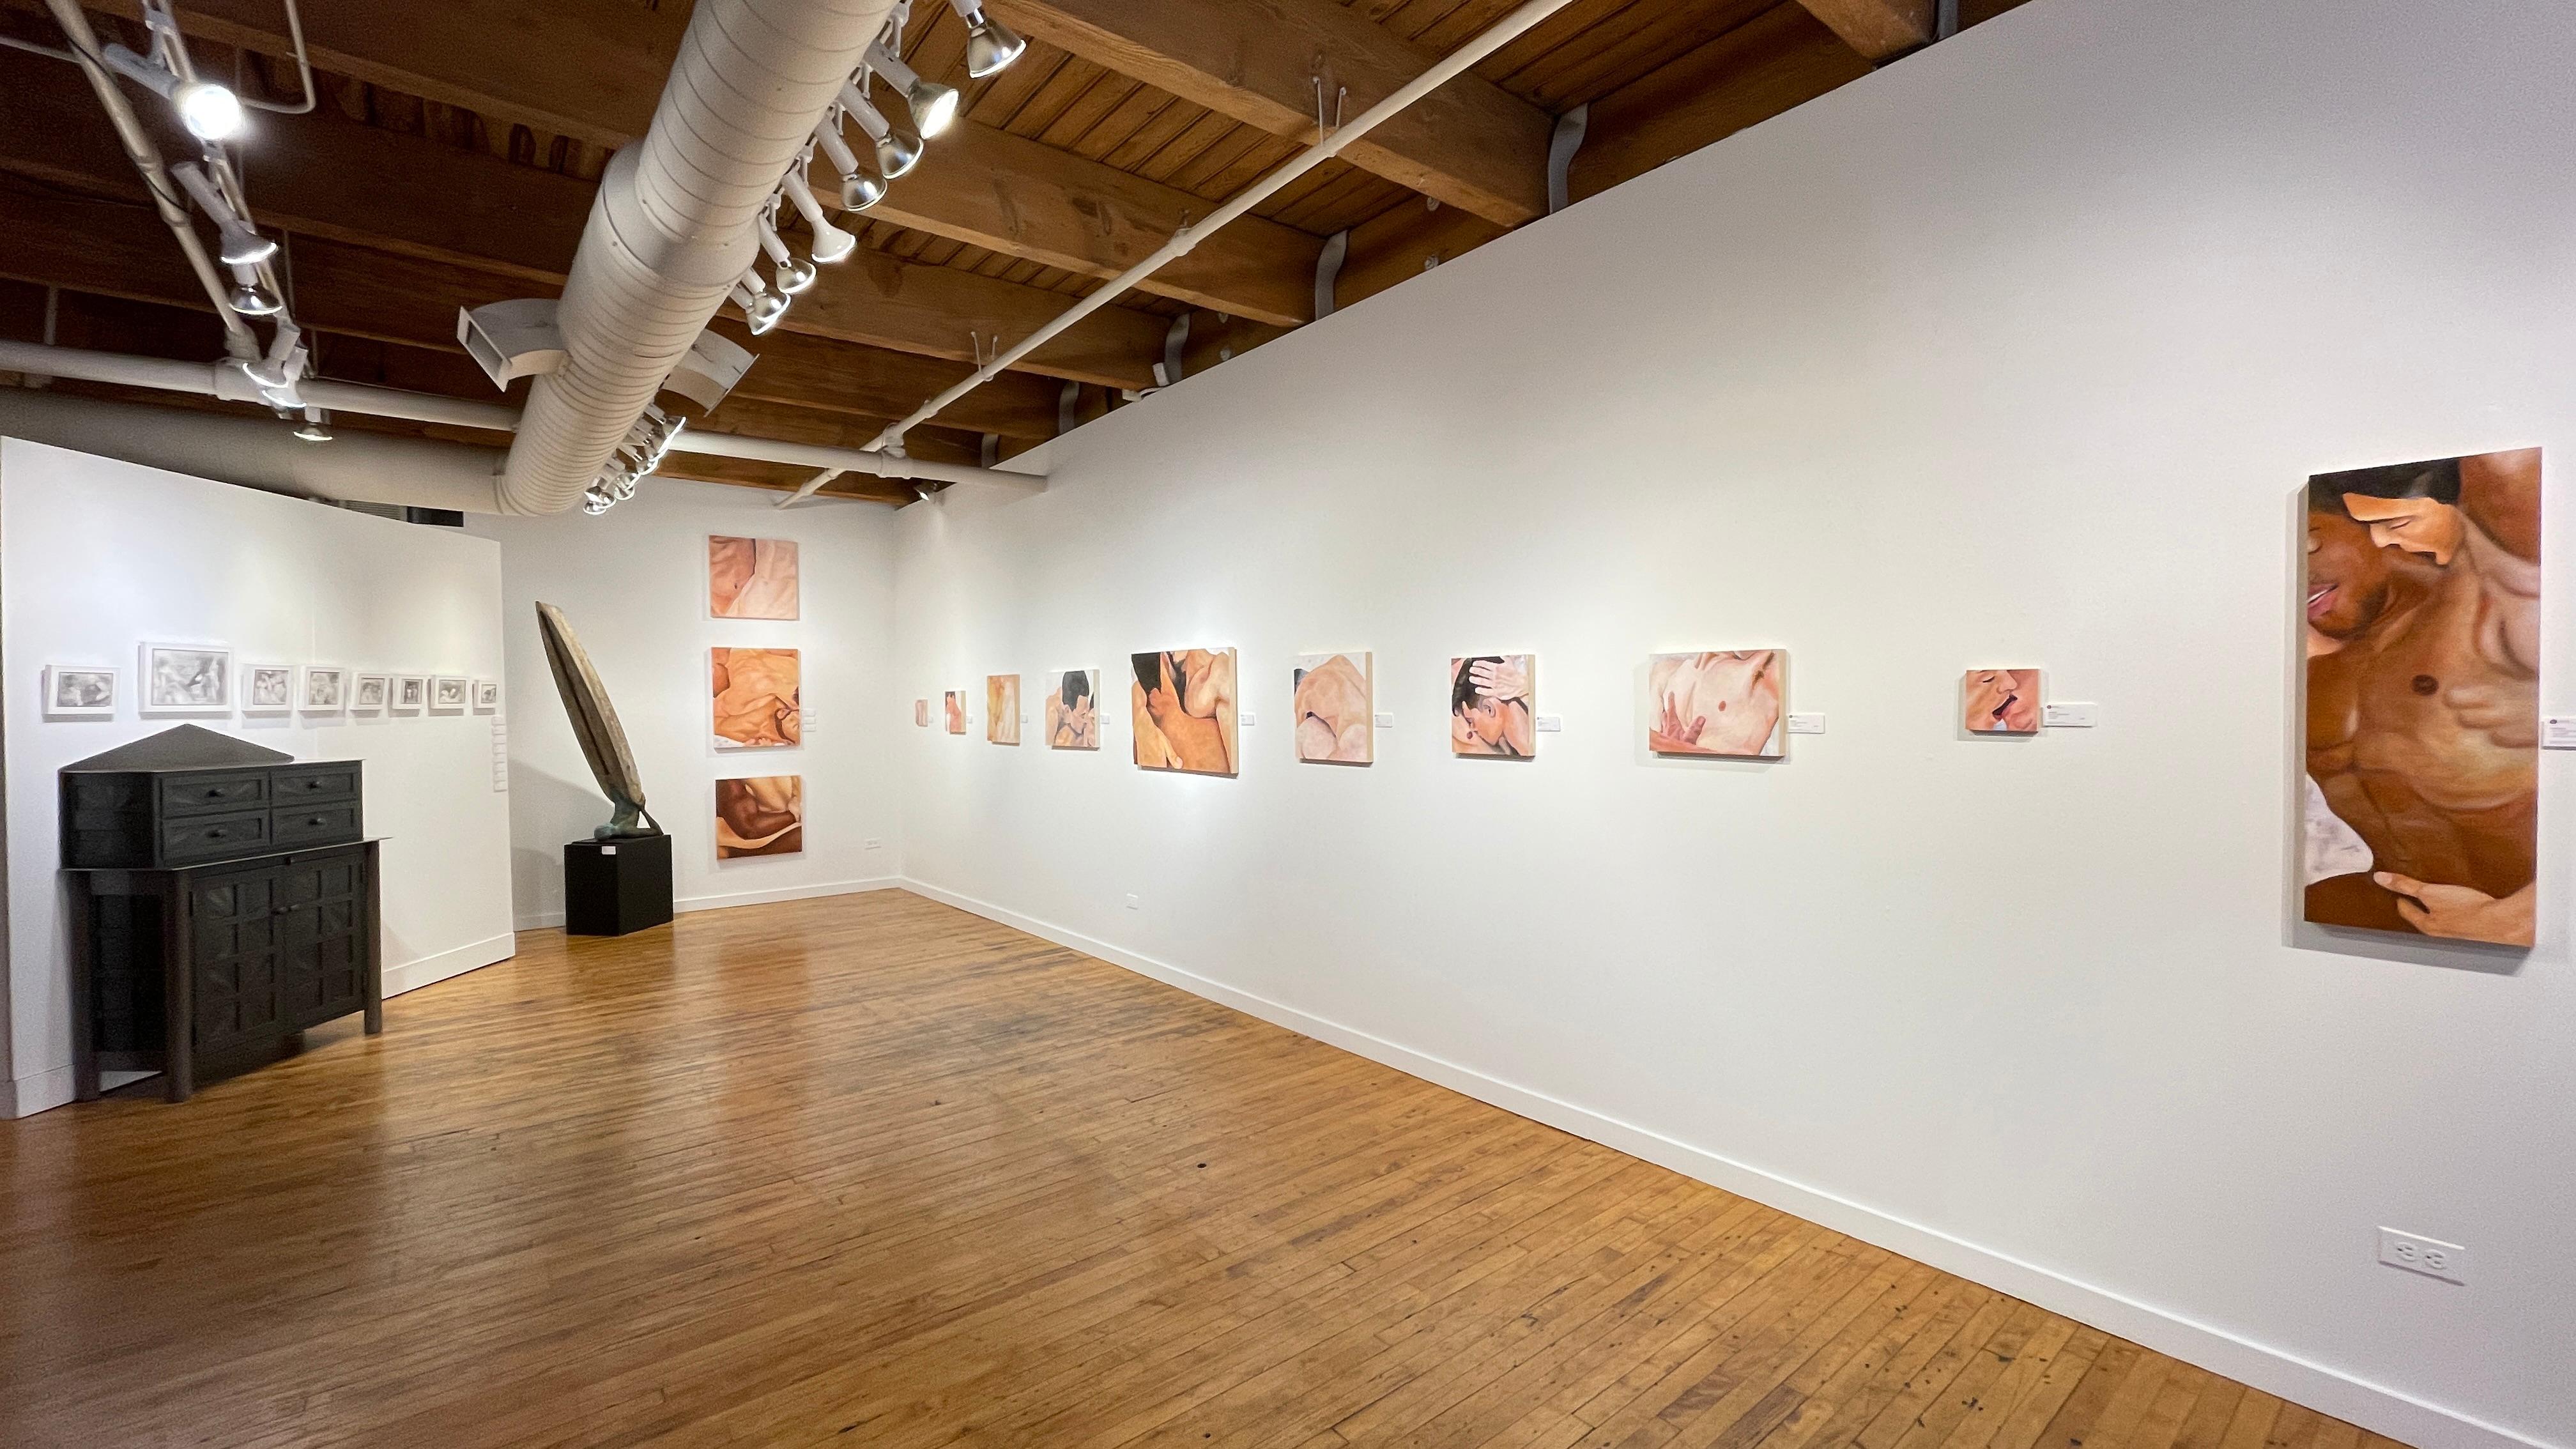 Using pornography as a vehicle for understanding, Rick Sindt's work explores the discovery and development of queer attraction. Sindt transforms pornographic stills, repurposing them into images of intimacy.

Rick Sindt
And Then Comes Wonder
oil on